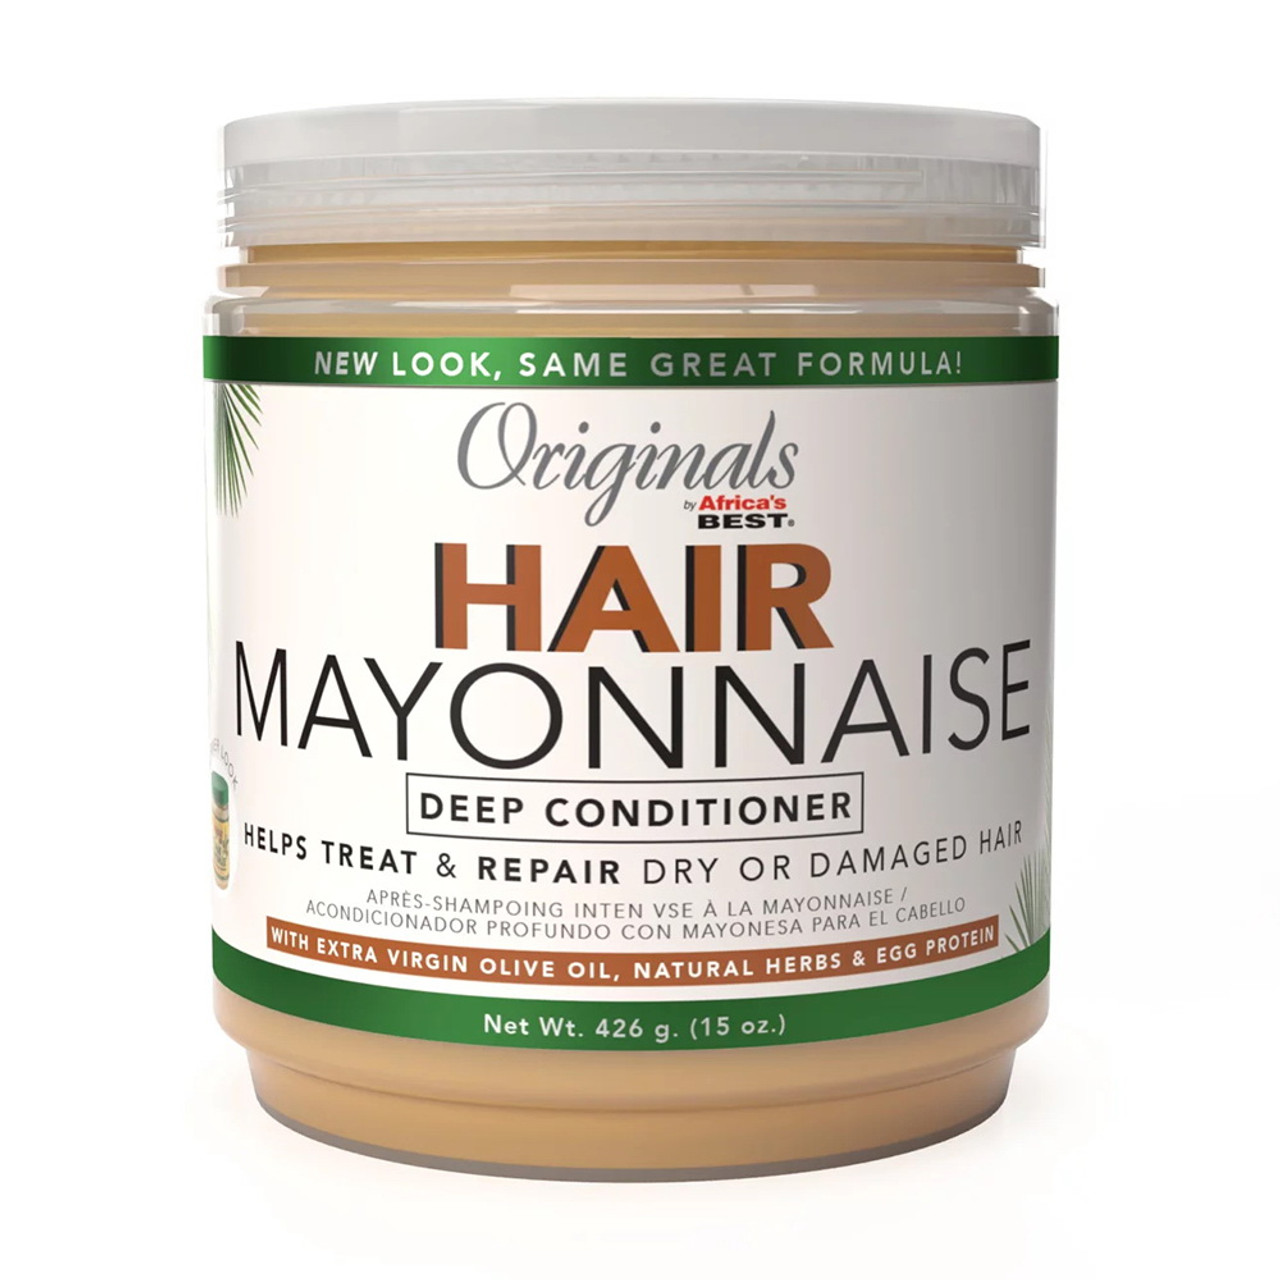 Organics by Africa's Best Hair Mayonnaise Treatment for Weak